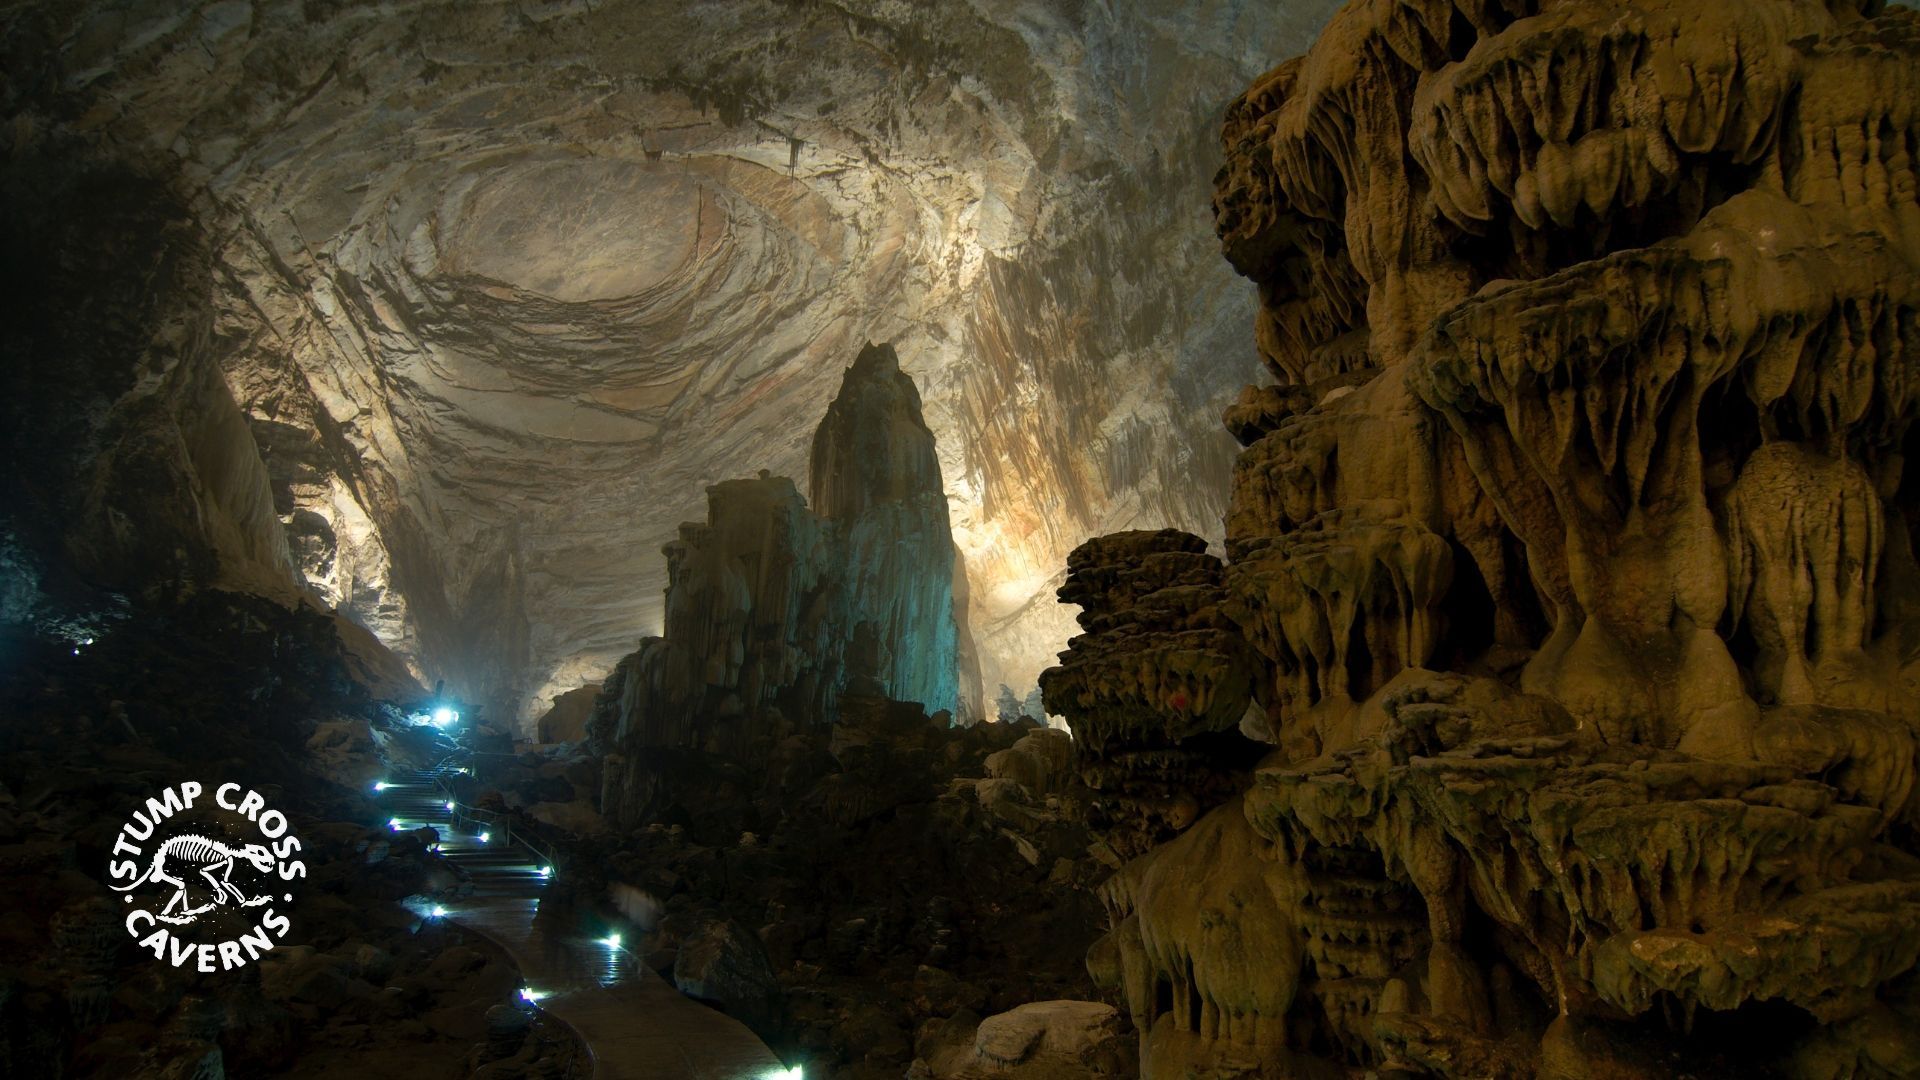 Fancy yourself as a spelunker? Discover the world's most unique, unusual and amazing caves and caverns.
